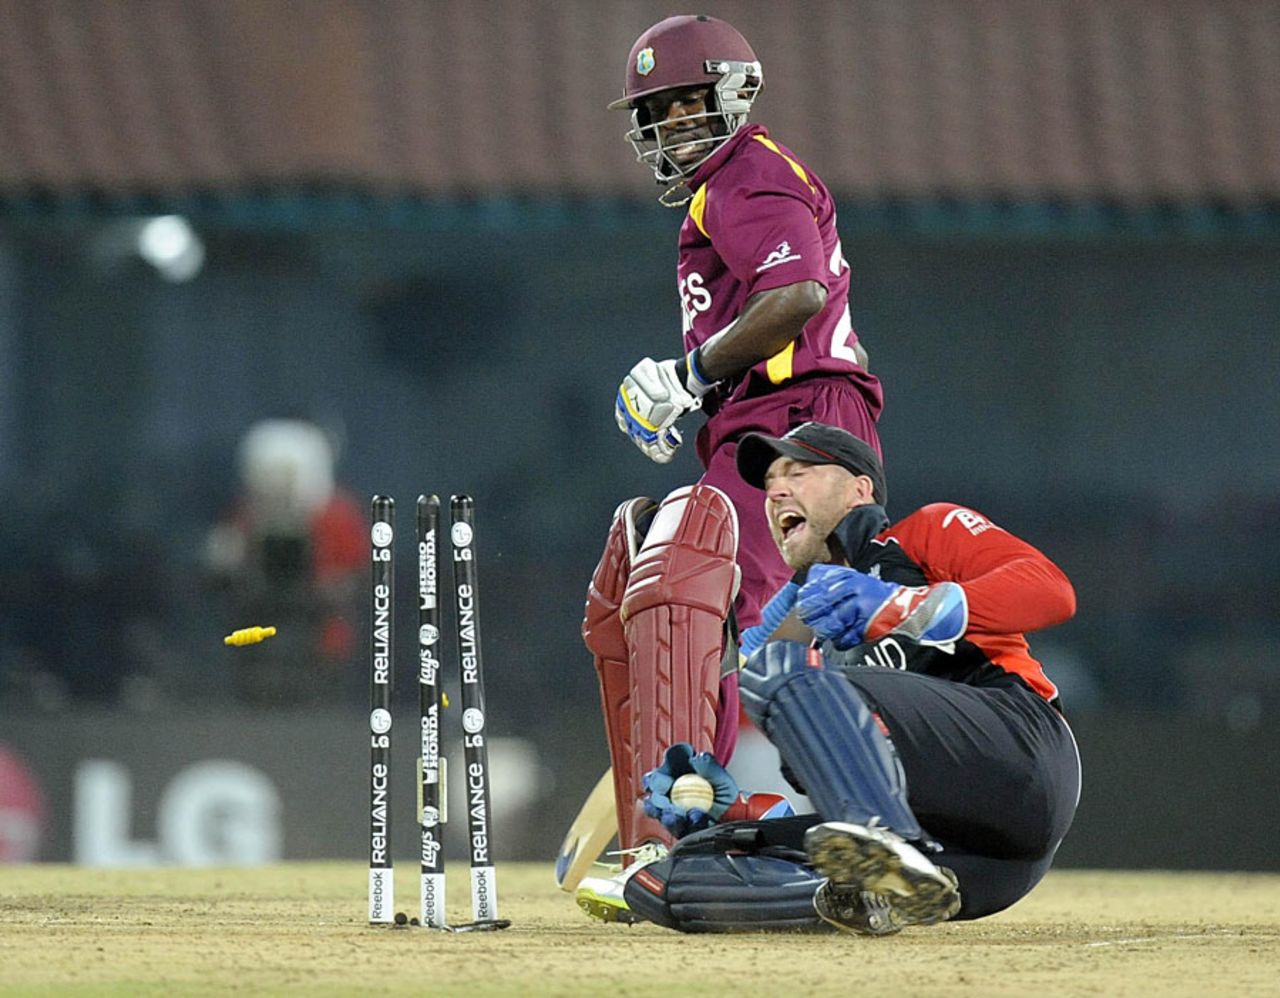 Matt Prior completed a sharp stumping to remove Devon Smith, England v West Indies, World Cup, Group B, March 17, 2011